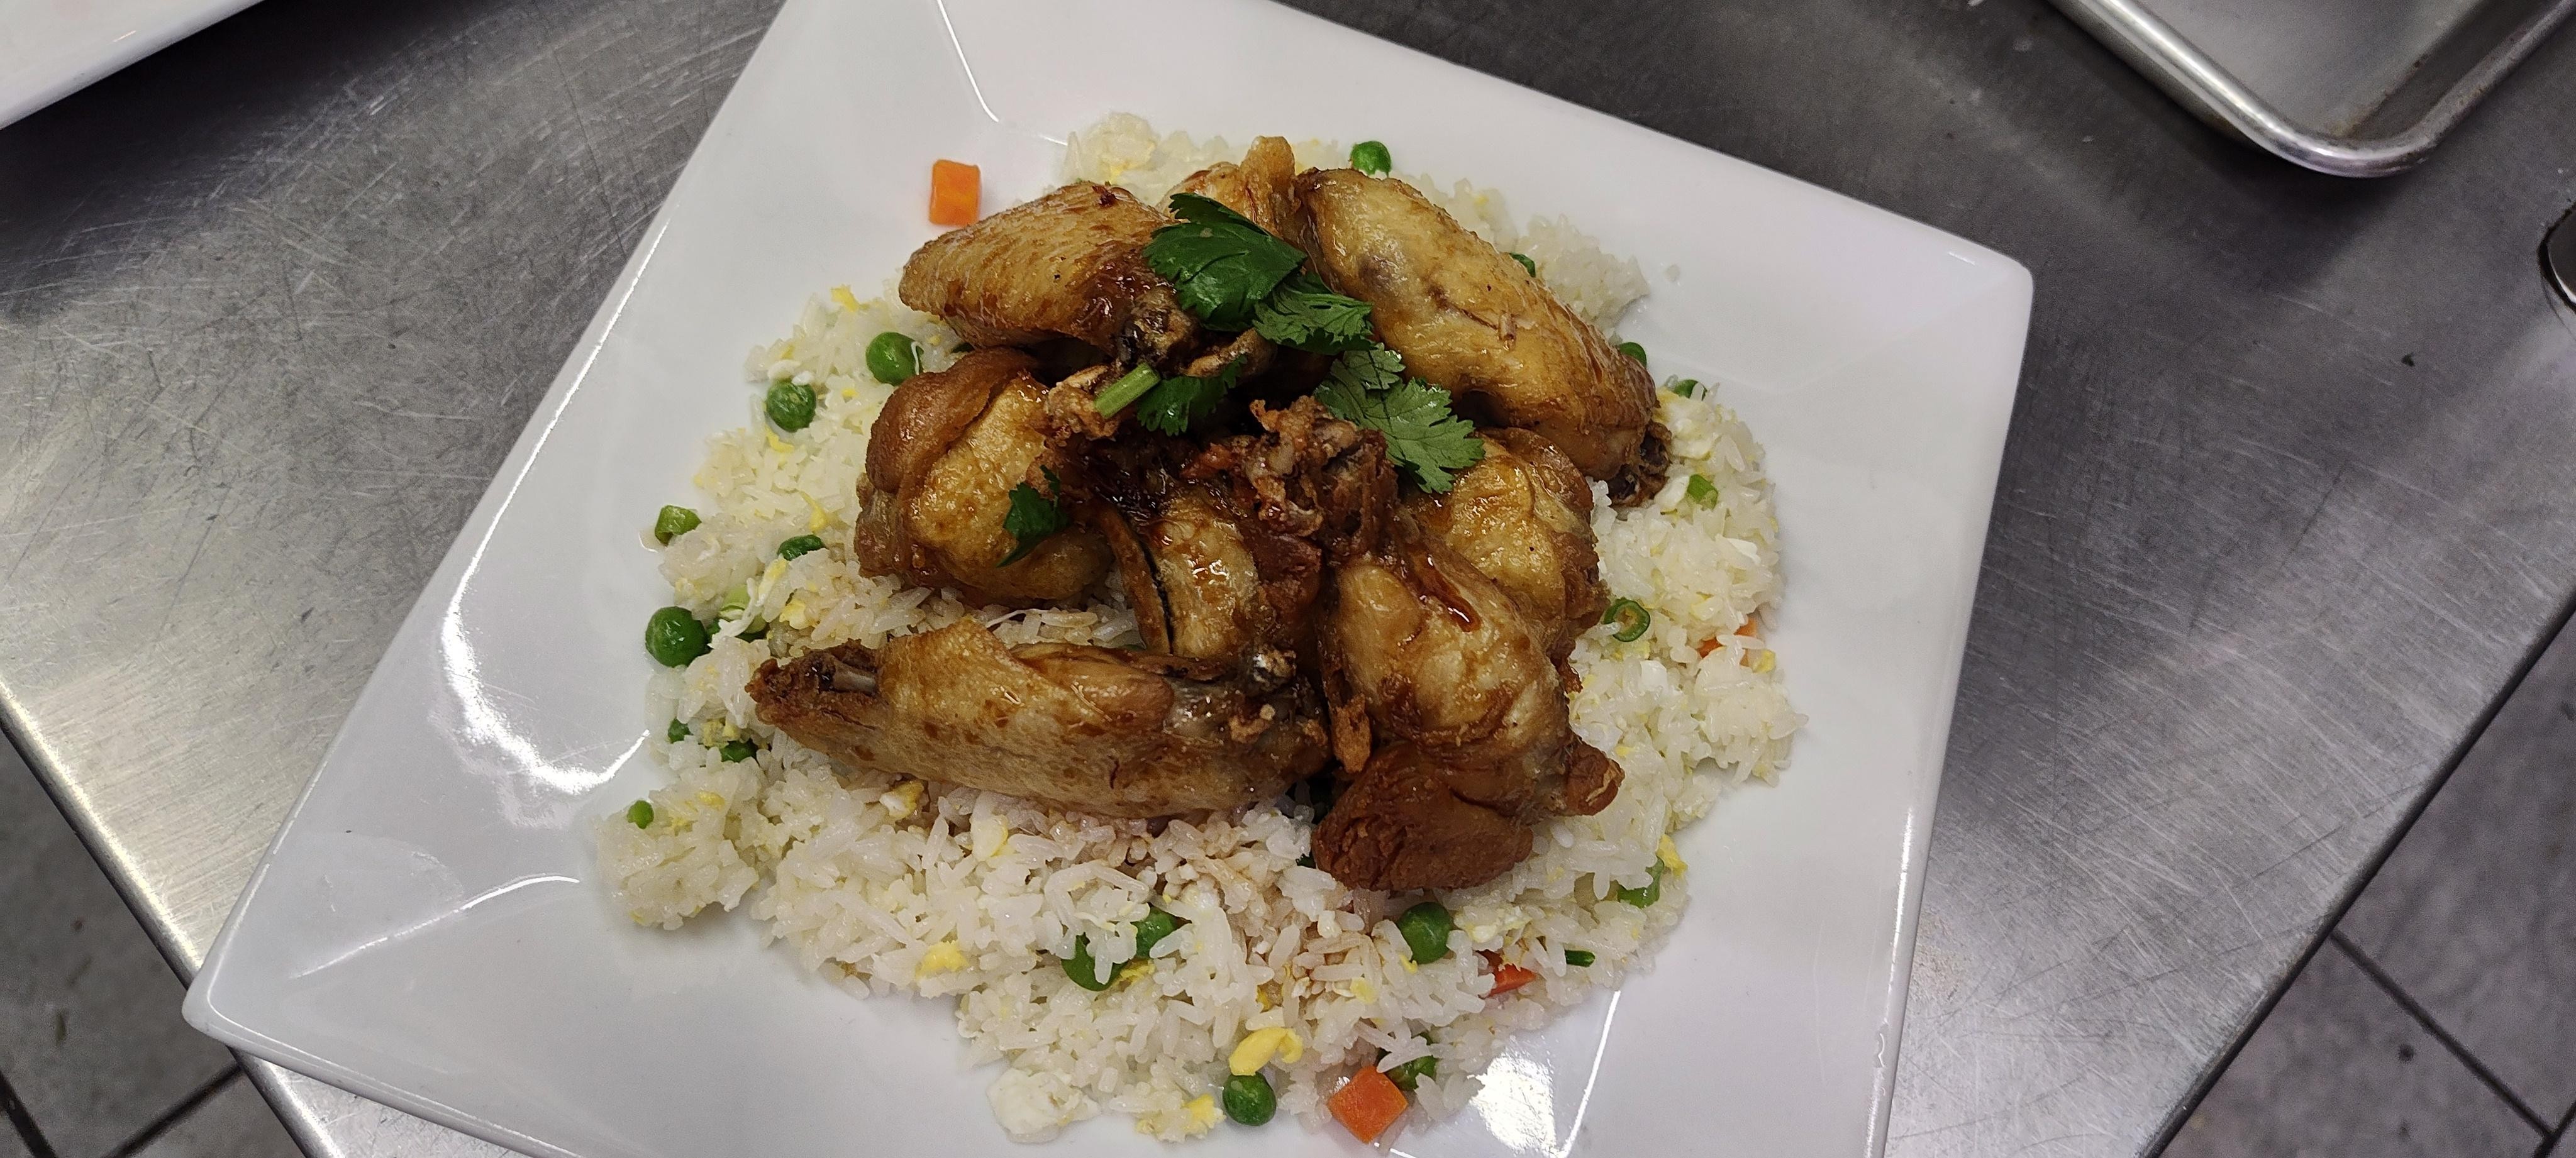 52. Fried rice with wings